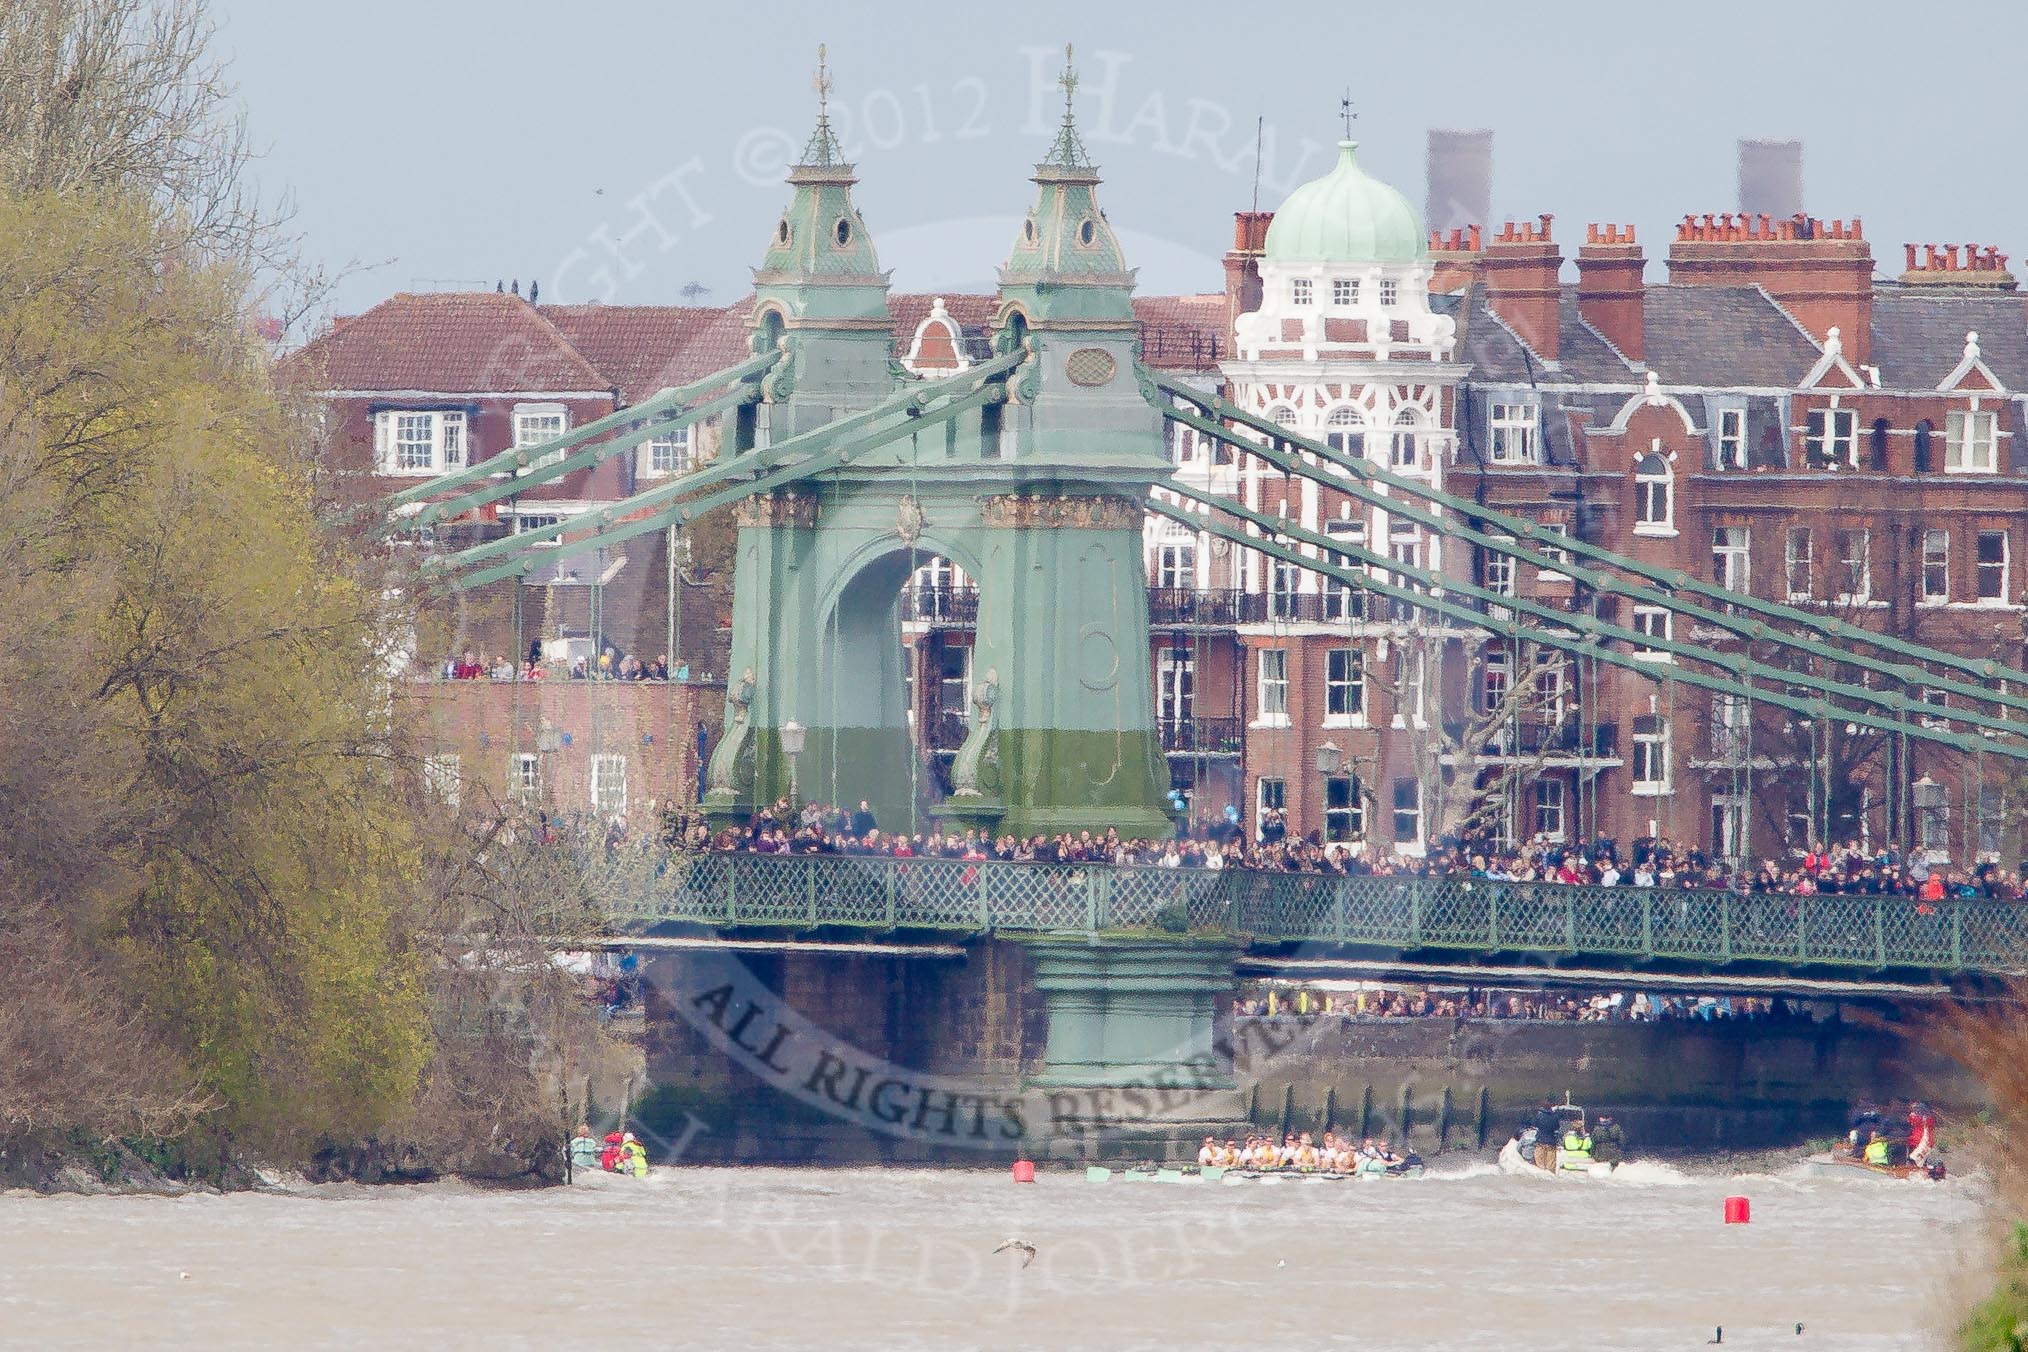 The Boat Race 2012: The Isis v Goldie Boat Race. The Oxford reserve boat Isis, in blue, in the lead, approaching Hammersmith Bridge, the Goldie crew in yellow..




on 07 April 2012 at 13:51, image #197